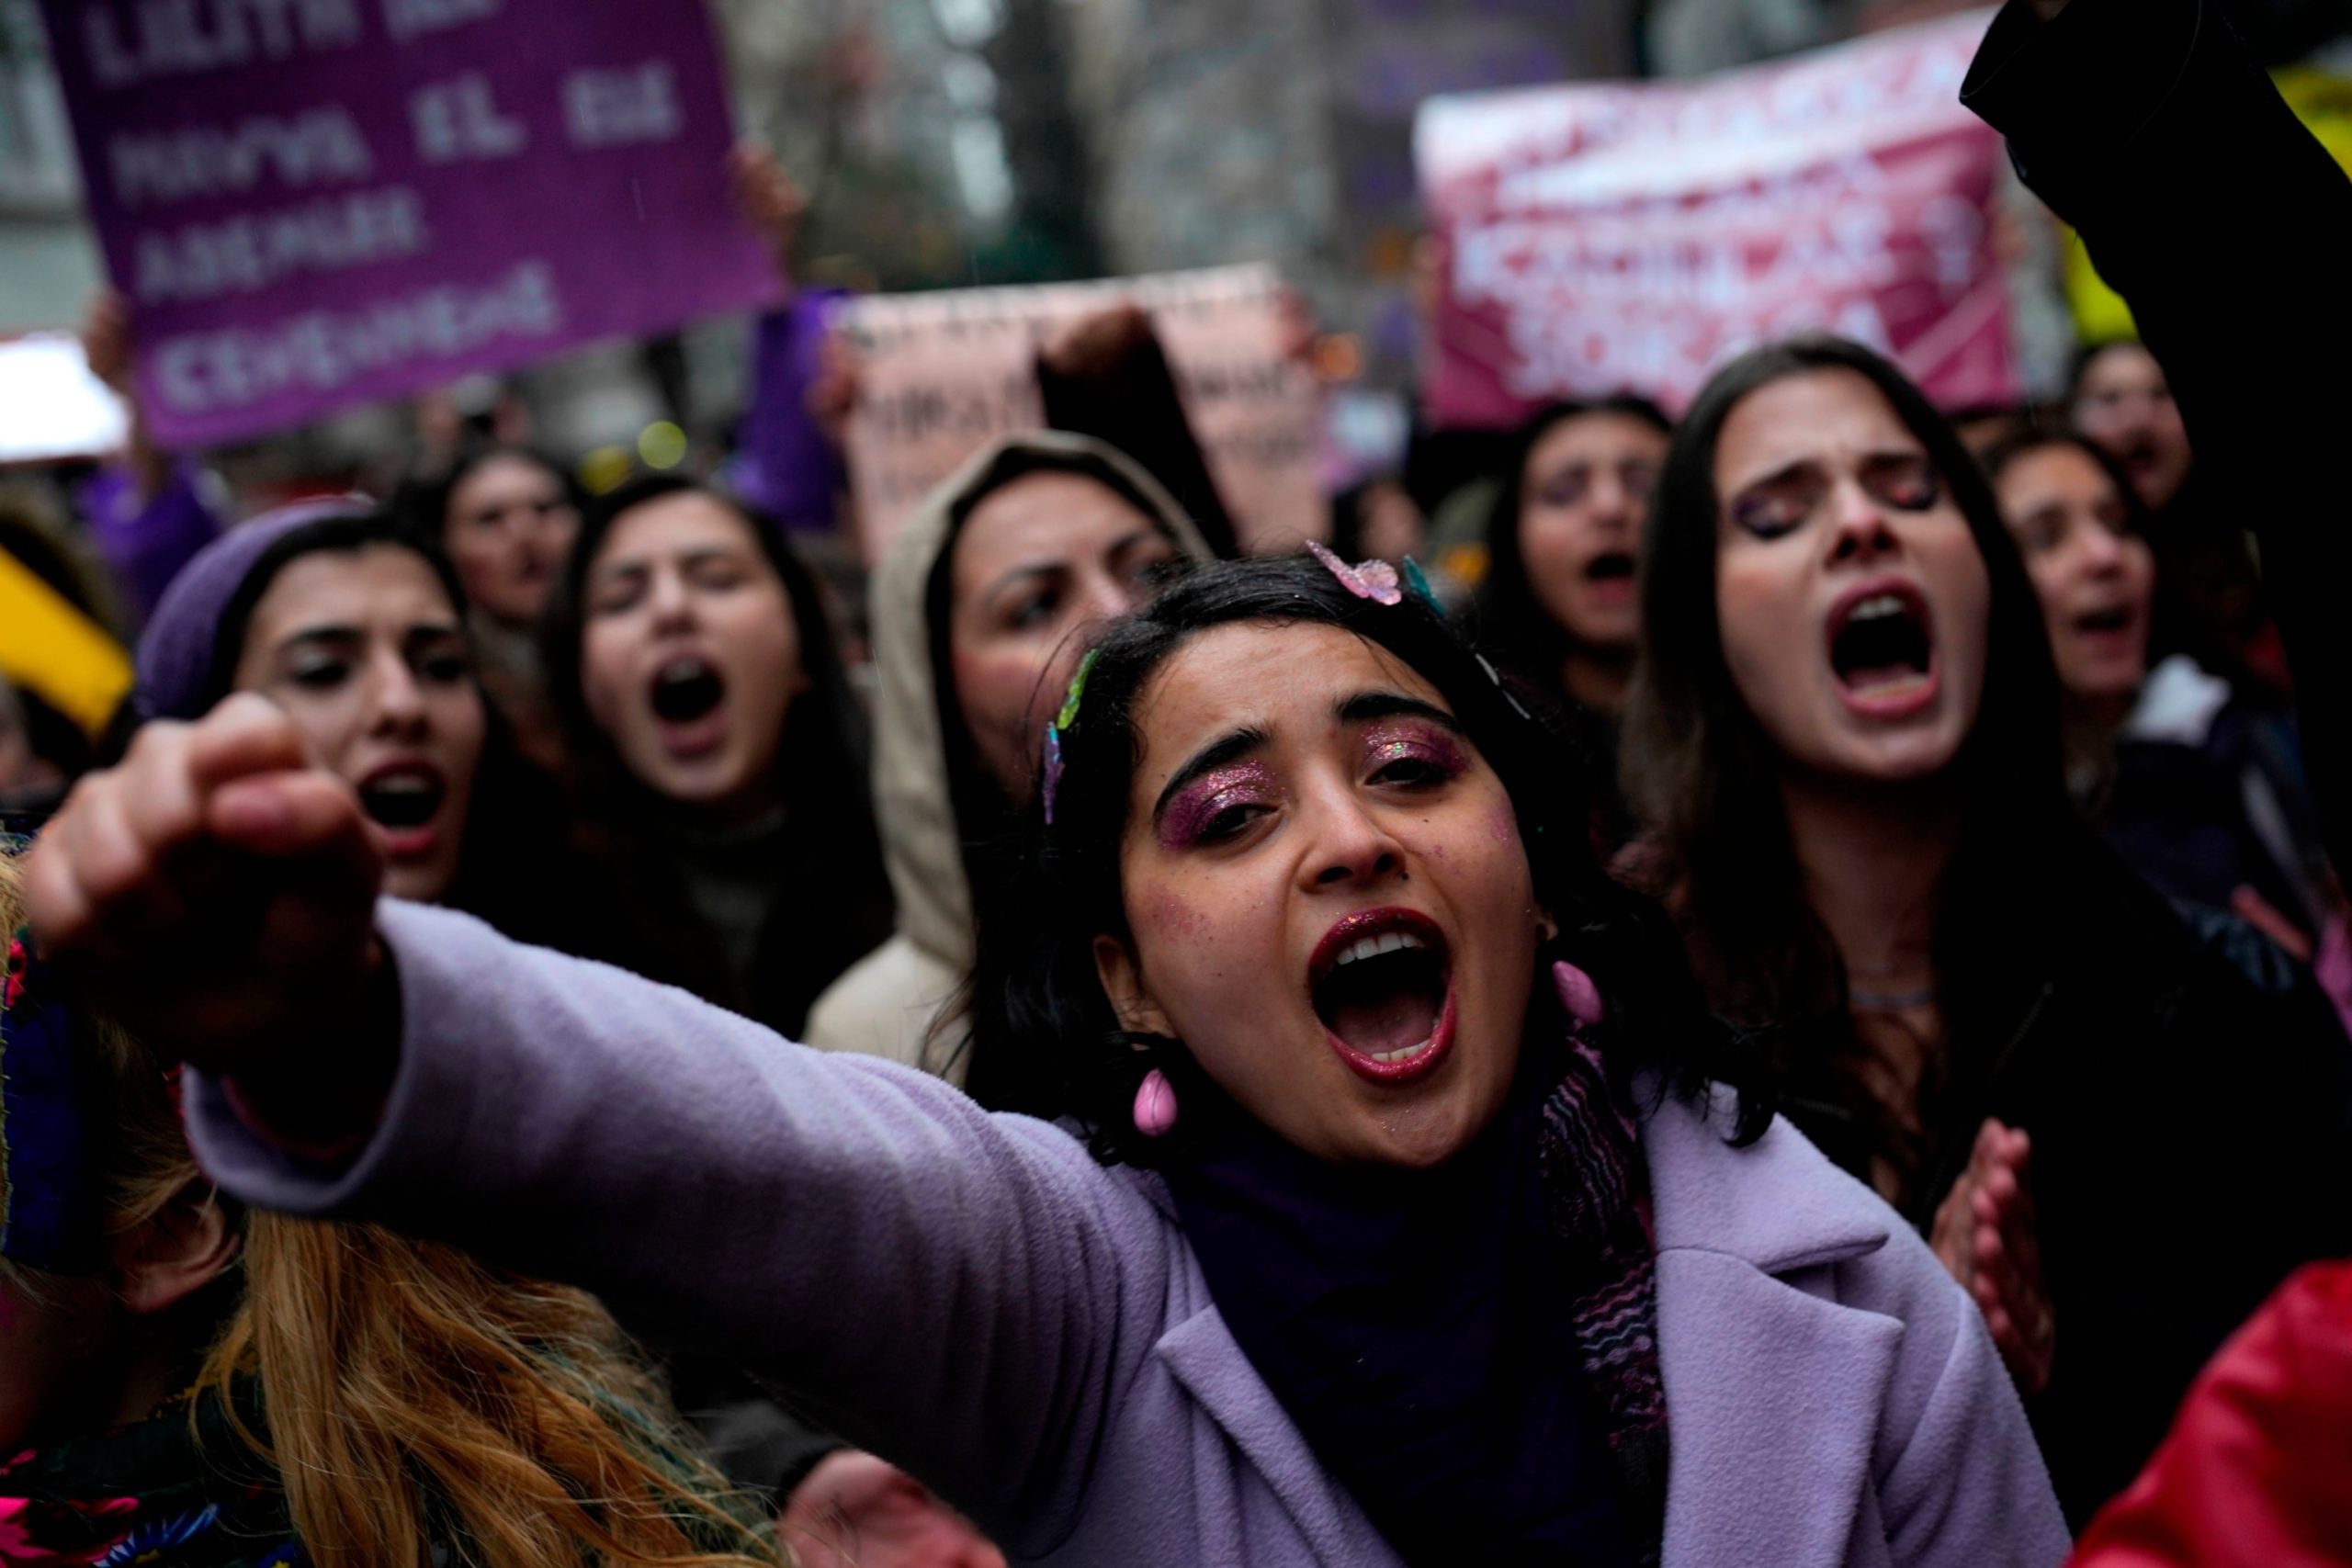 Turkish women protest for equal rights despite ban